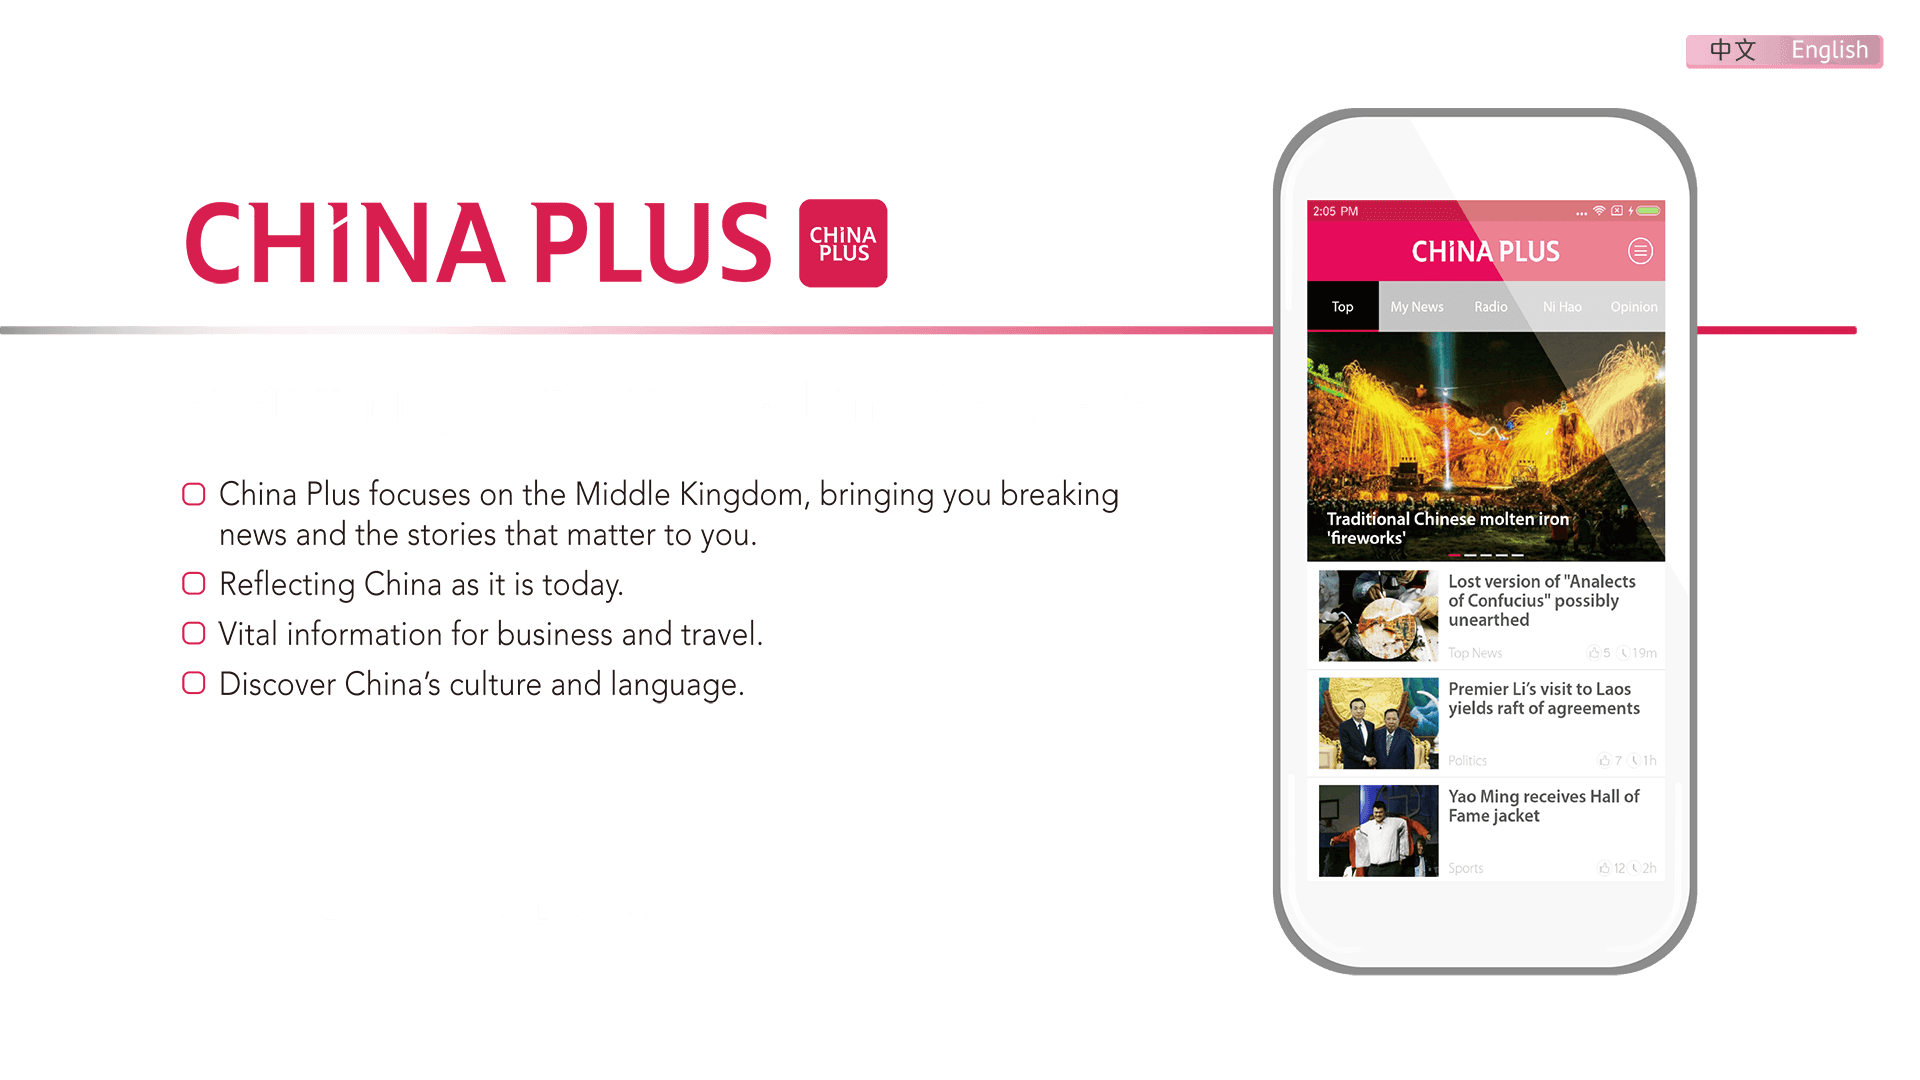 China Plus everythins is focus，all in one place